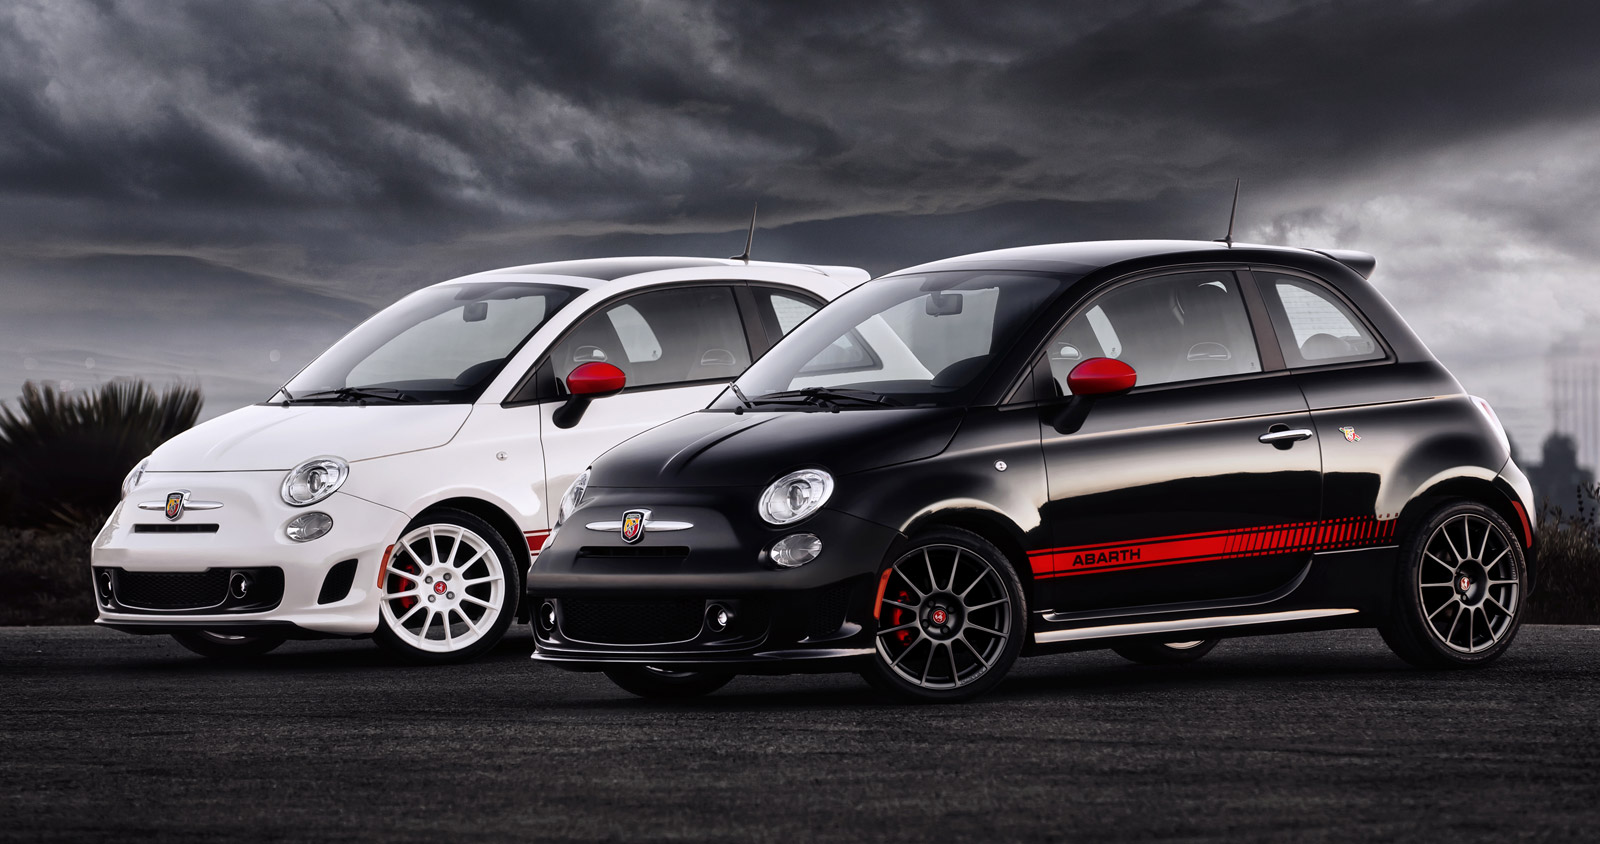 Honger balkon stoom Small And Wicked" 2012 Fiat 500 Abarth Debuts At L.A. Show